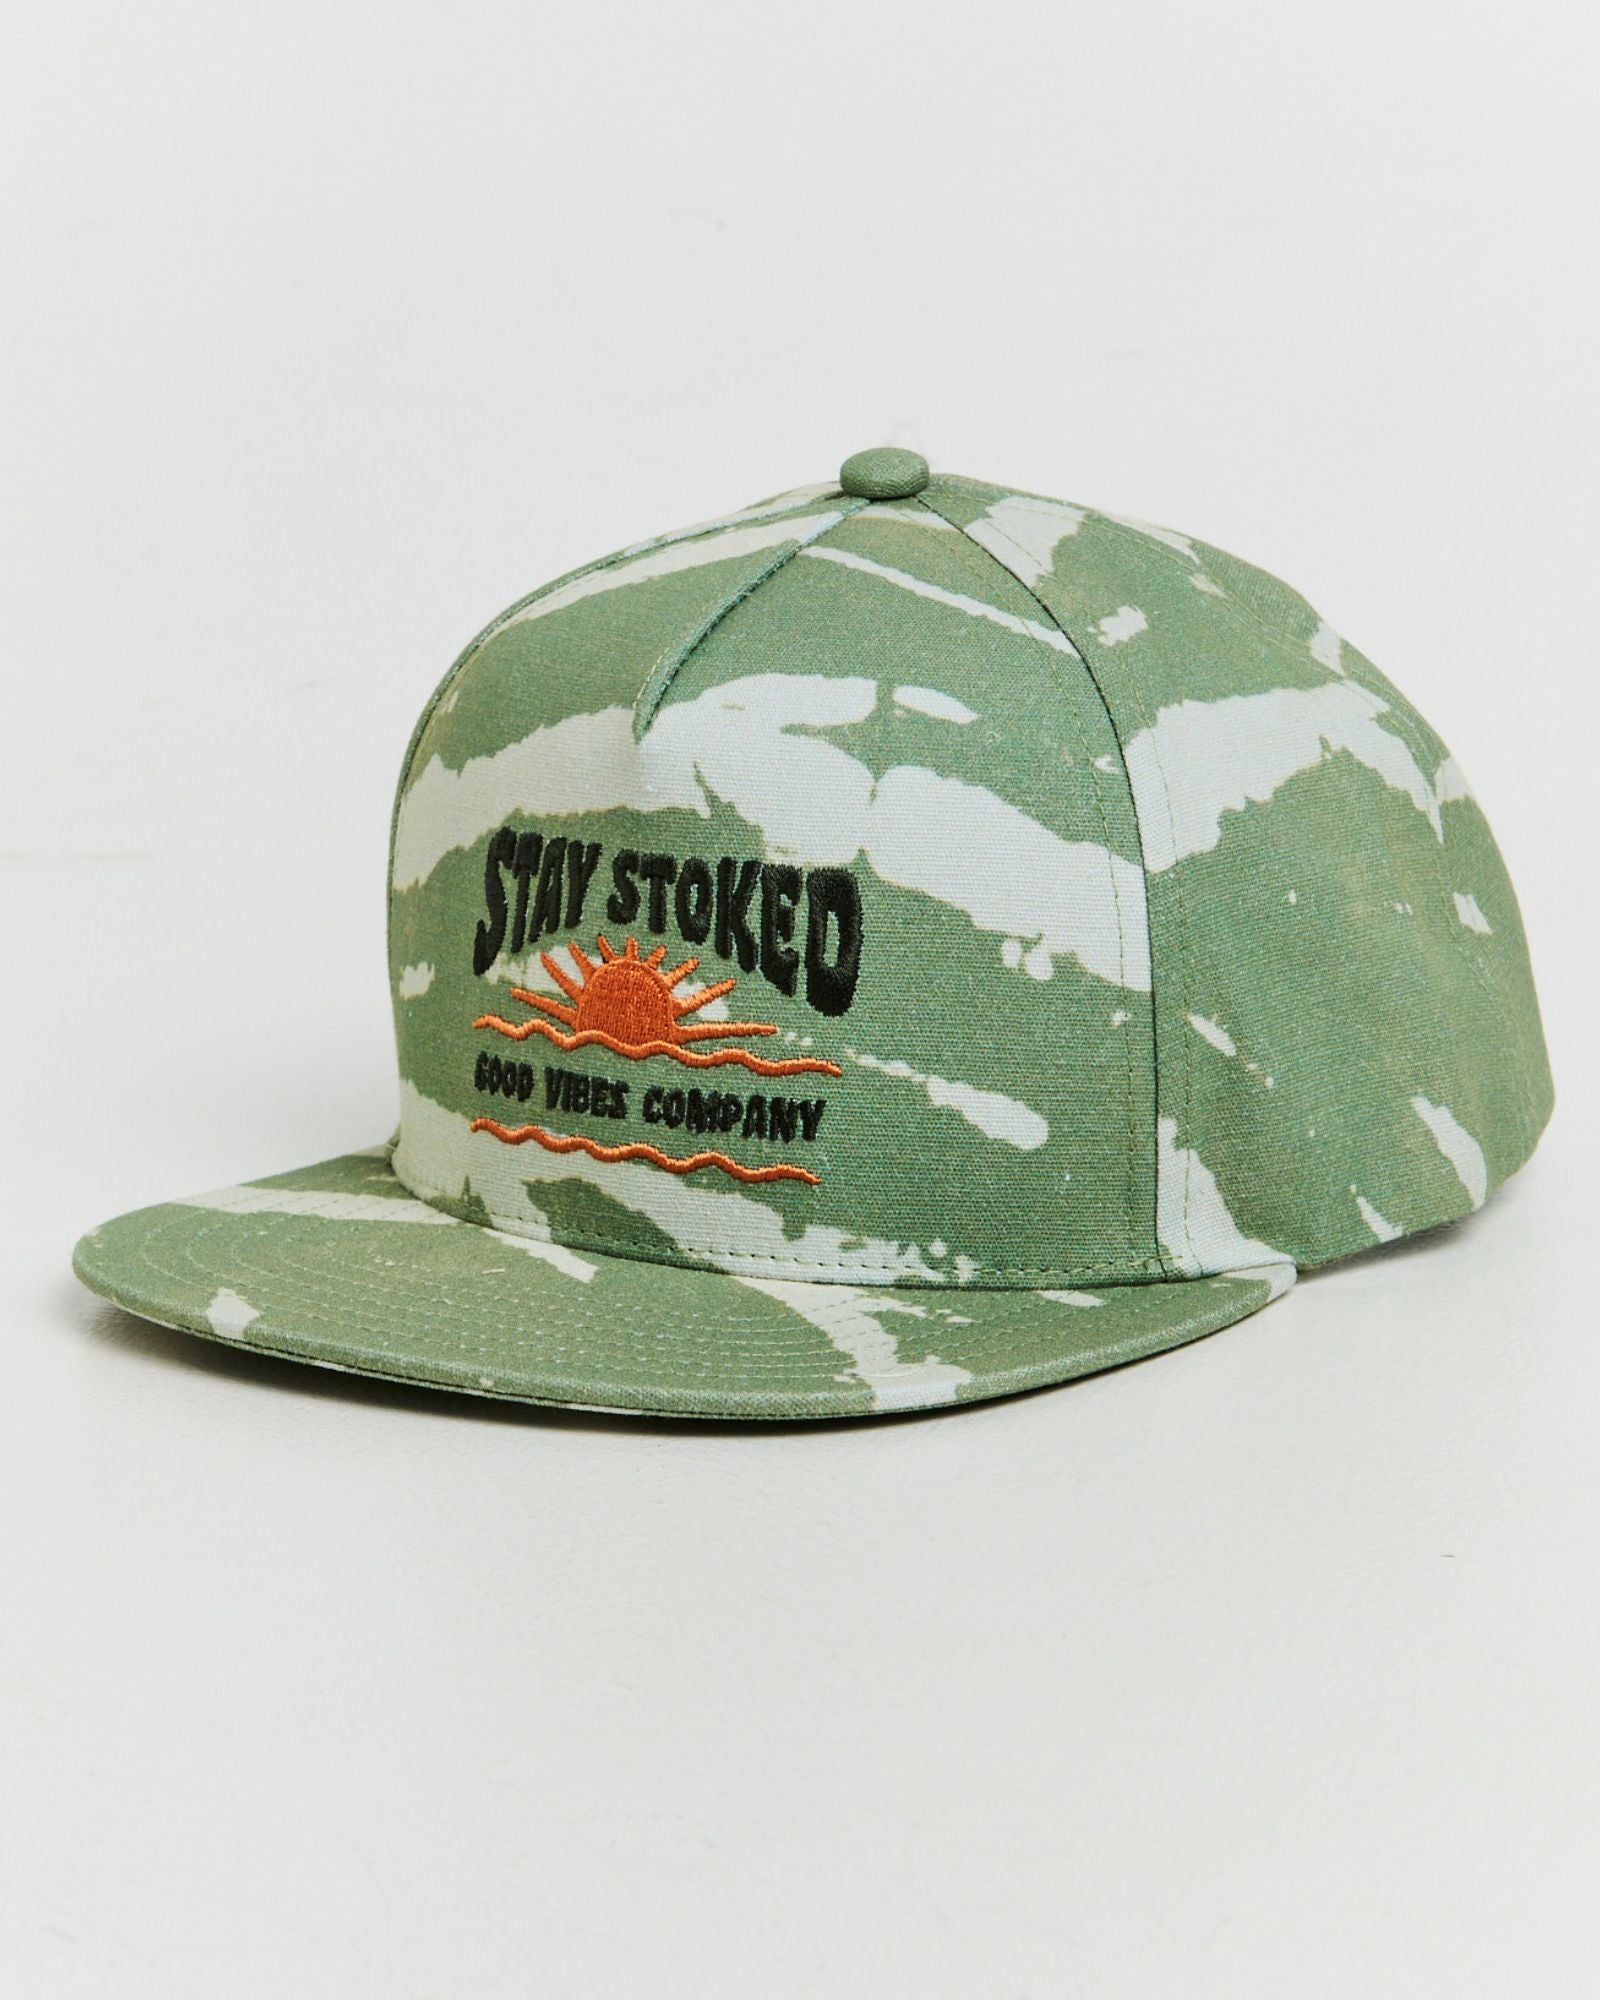 Camo Cap by Alphabet Soup! 5-panel trucker design of cotton canvas drill, unique tie dye print, adjustable snap back fastening for comfy fit.